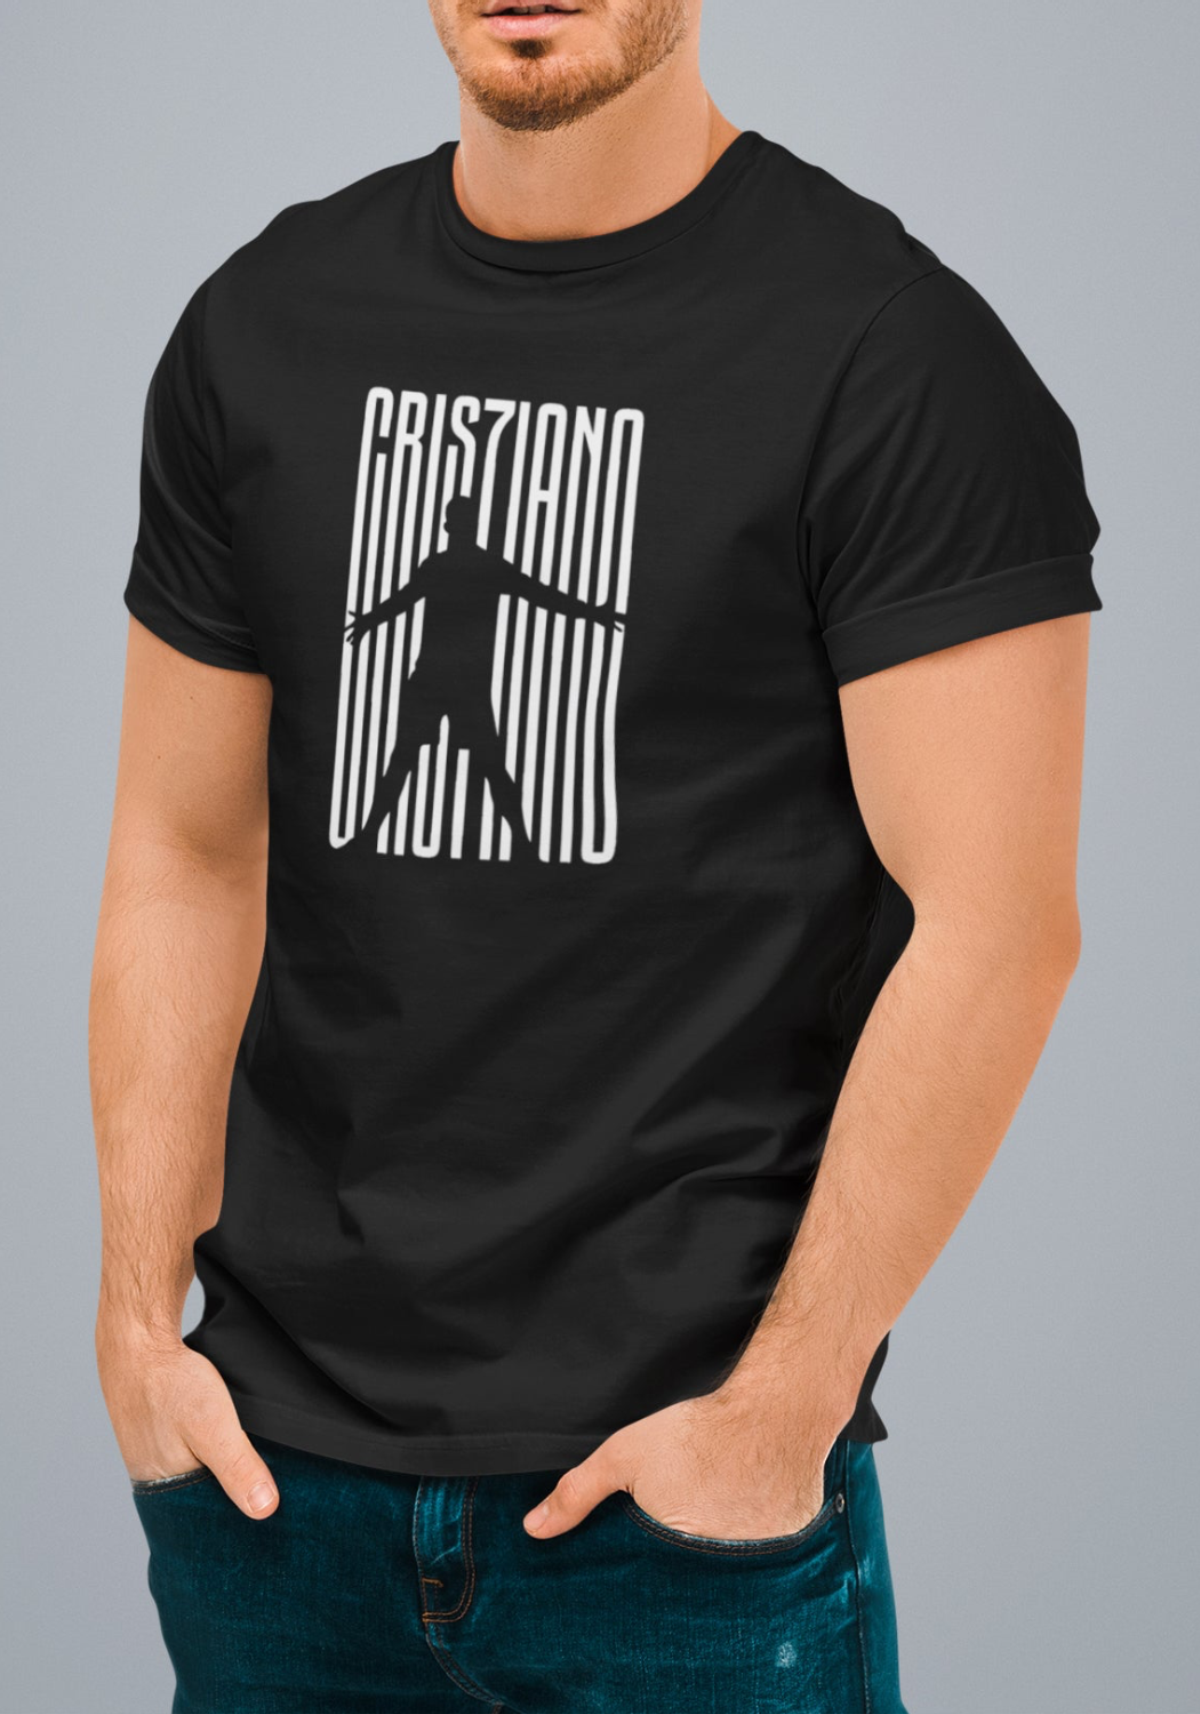 Cristiano Tshirt – Fizzique Official